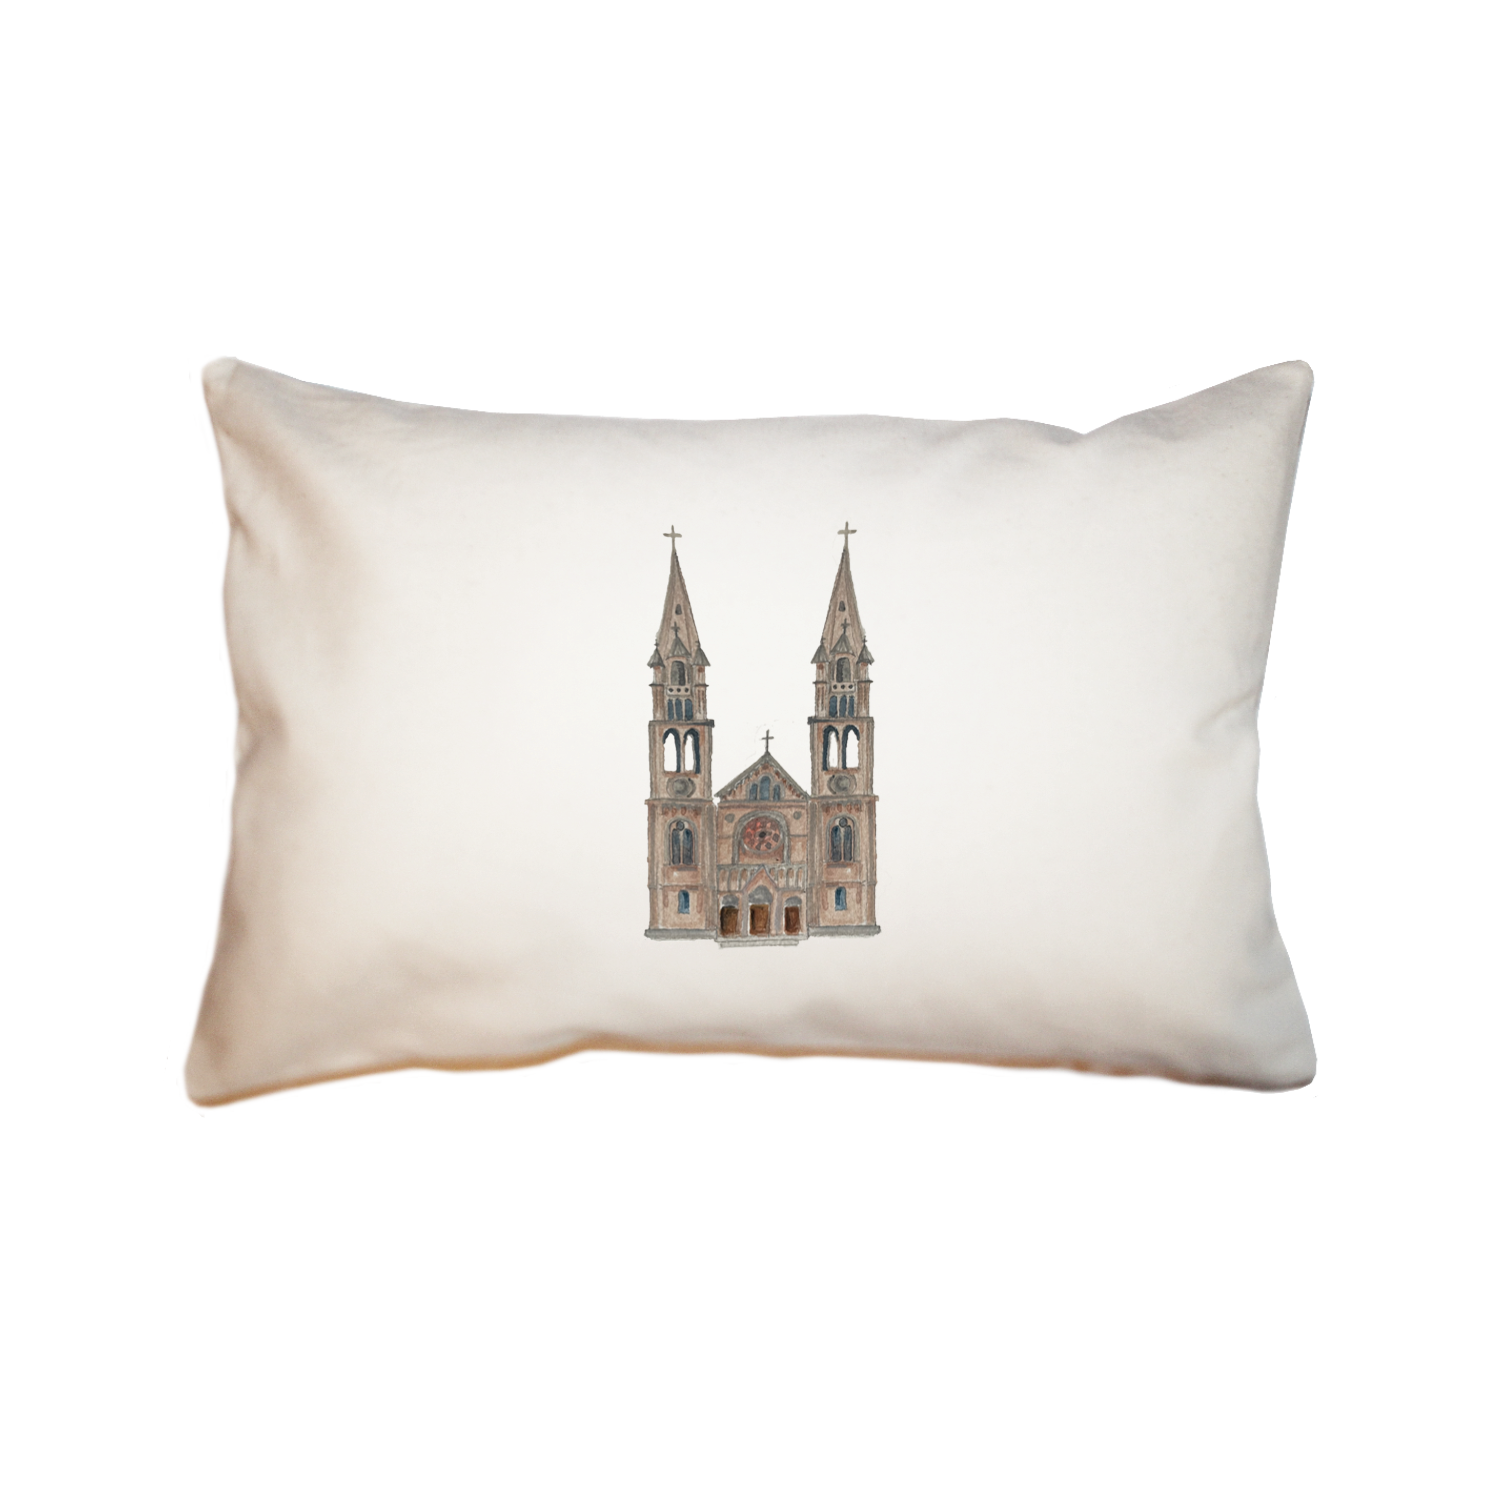 mission hill basilica large rectangle pillow